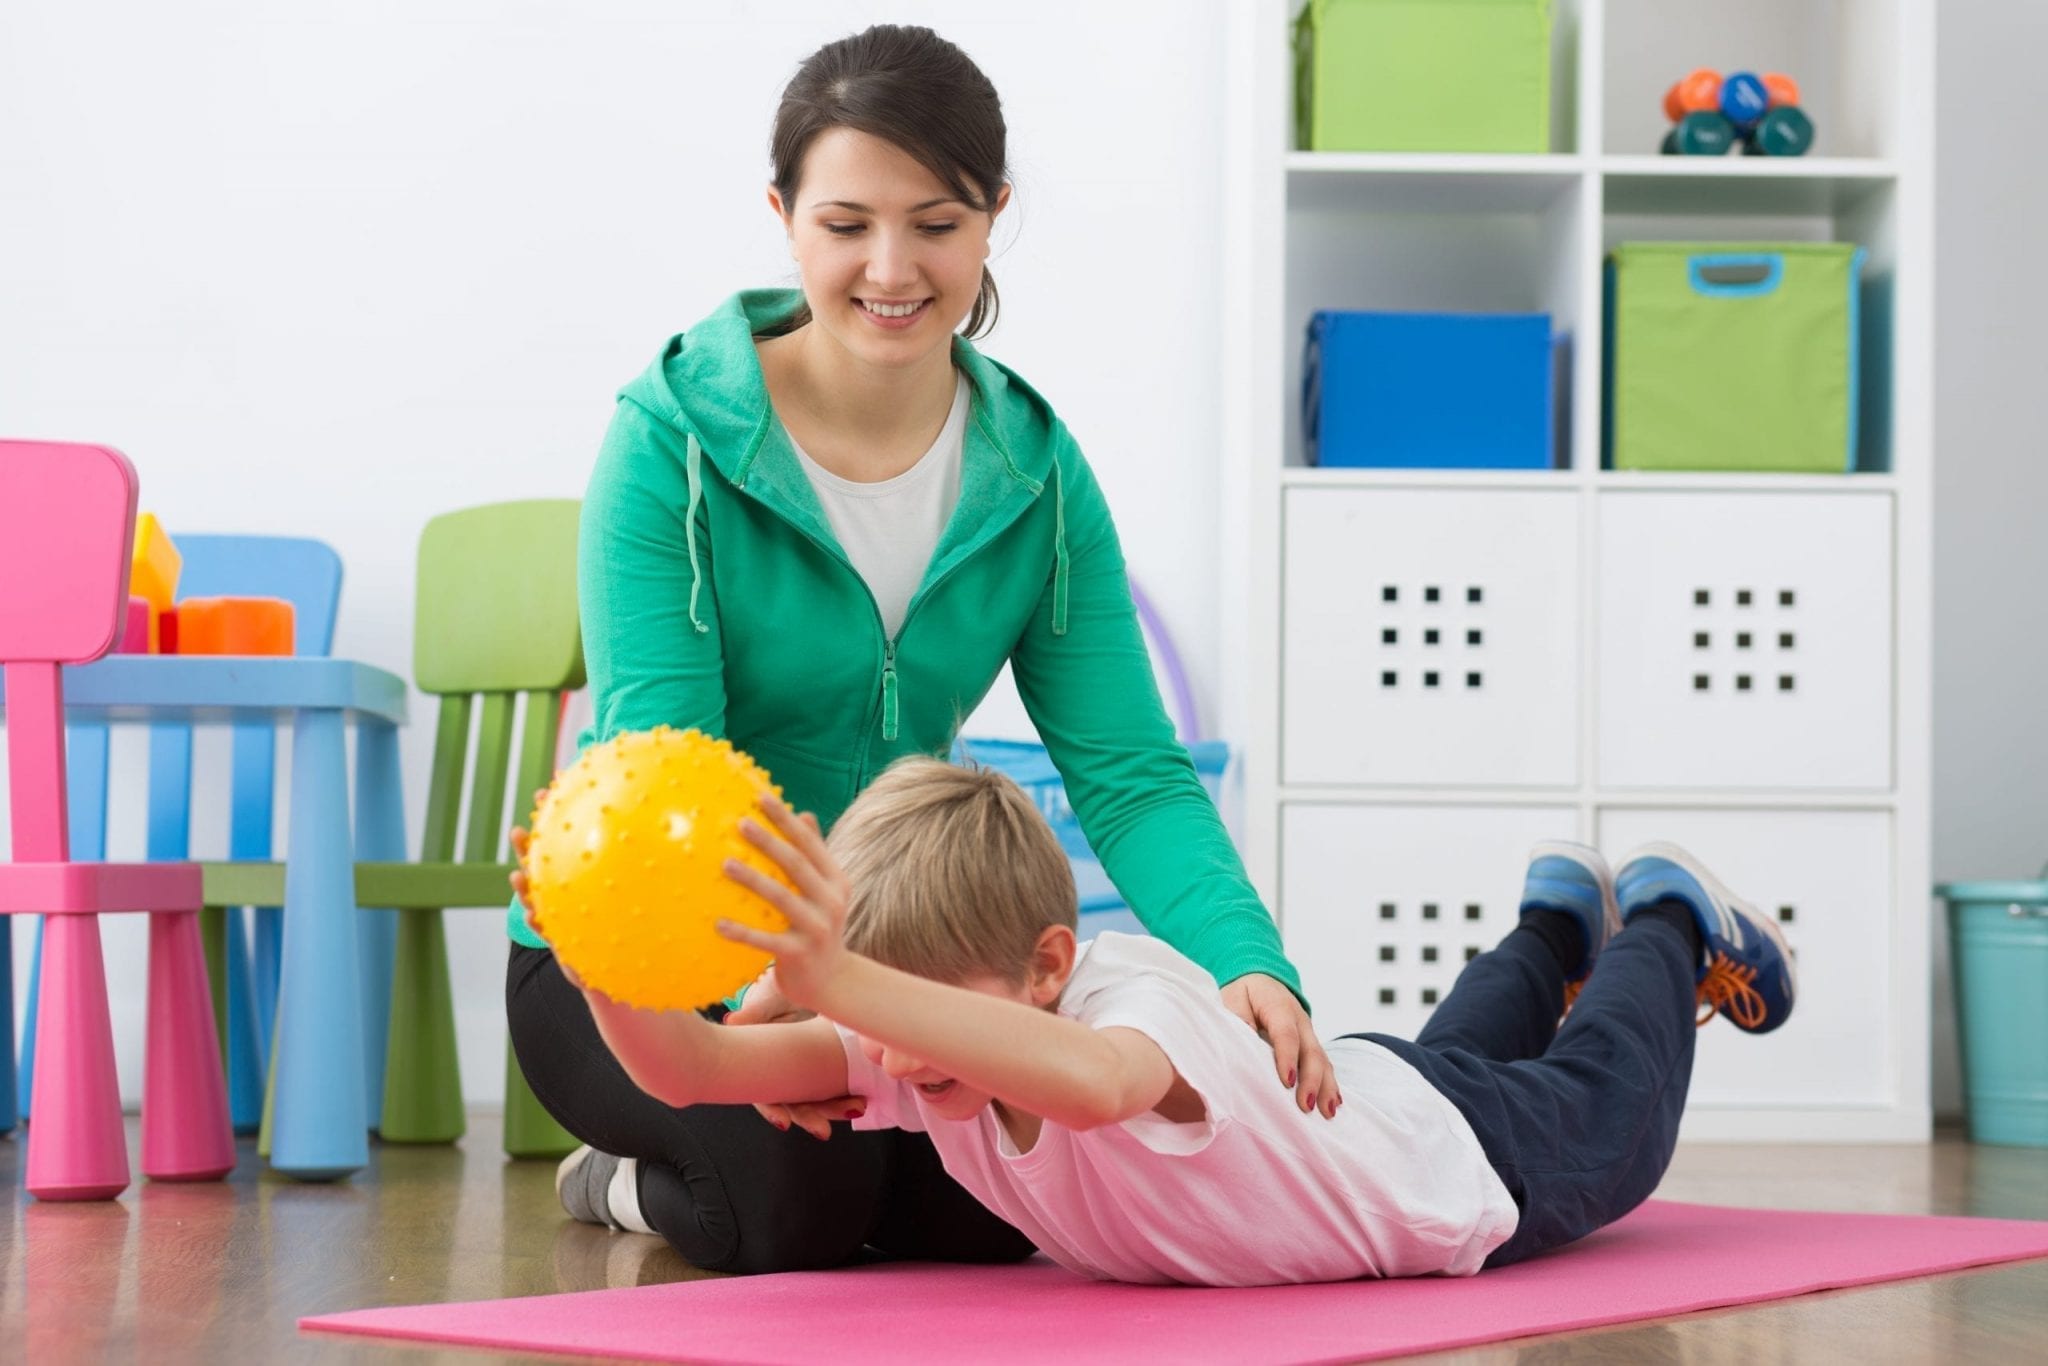 PHYSIOTHERAPY TO CORRECT BAD POSTURE IN TEENAGERS AND CHILDREN IN LONDON – POOR  POSTURE IN TEENS AND PHYSIOTHERAPY REHABILITATION, PHYSIO TREATMENT AT HOME  OR AT THE PRACTICE WITH OUR PAEDIATRIC PHYSIOTHERAPIST IN